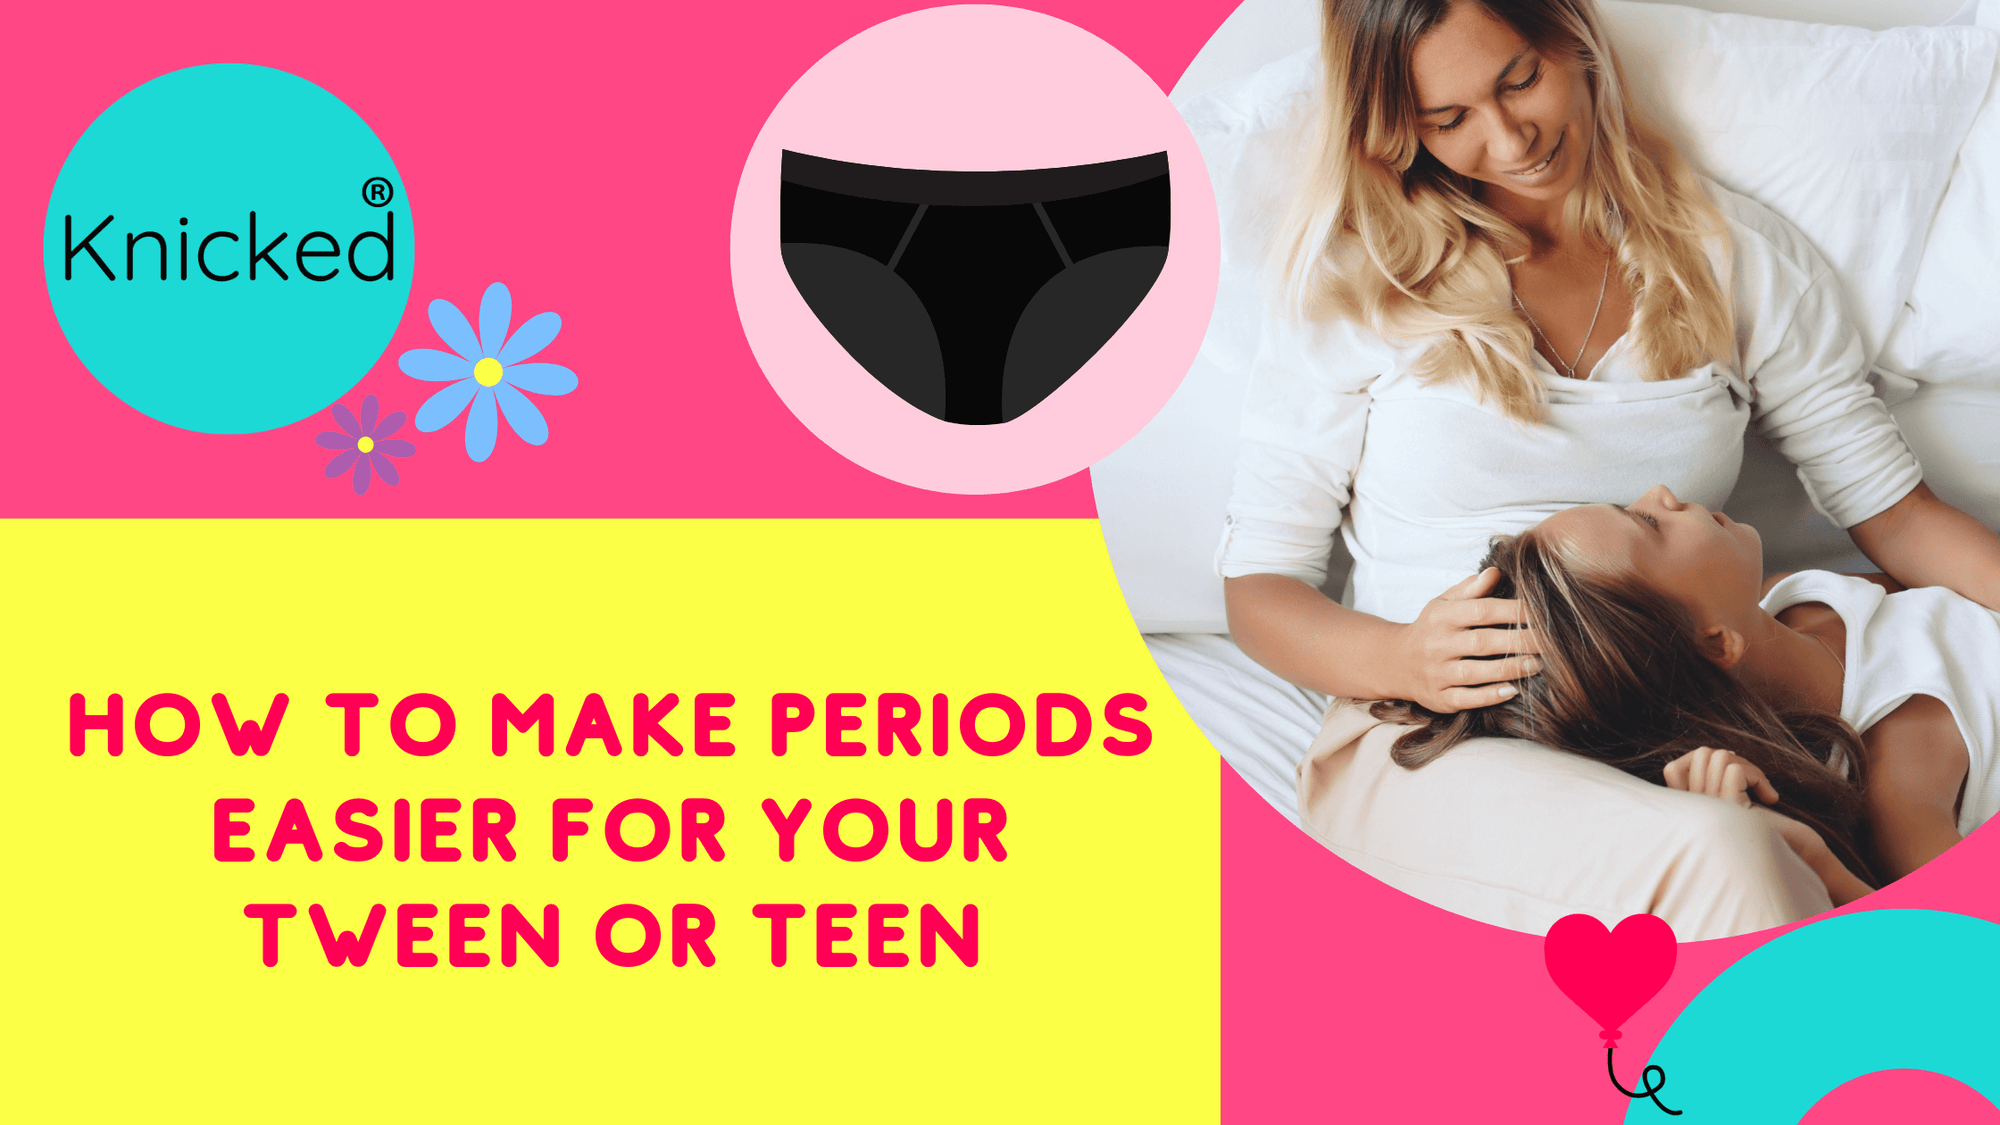 What do dancers wear and use when they have their period